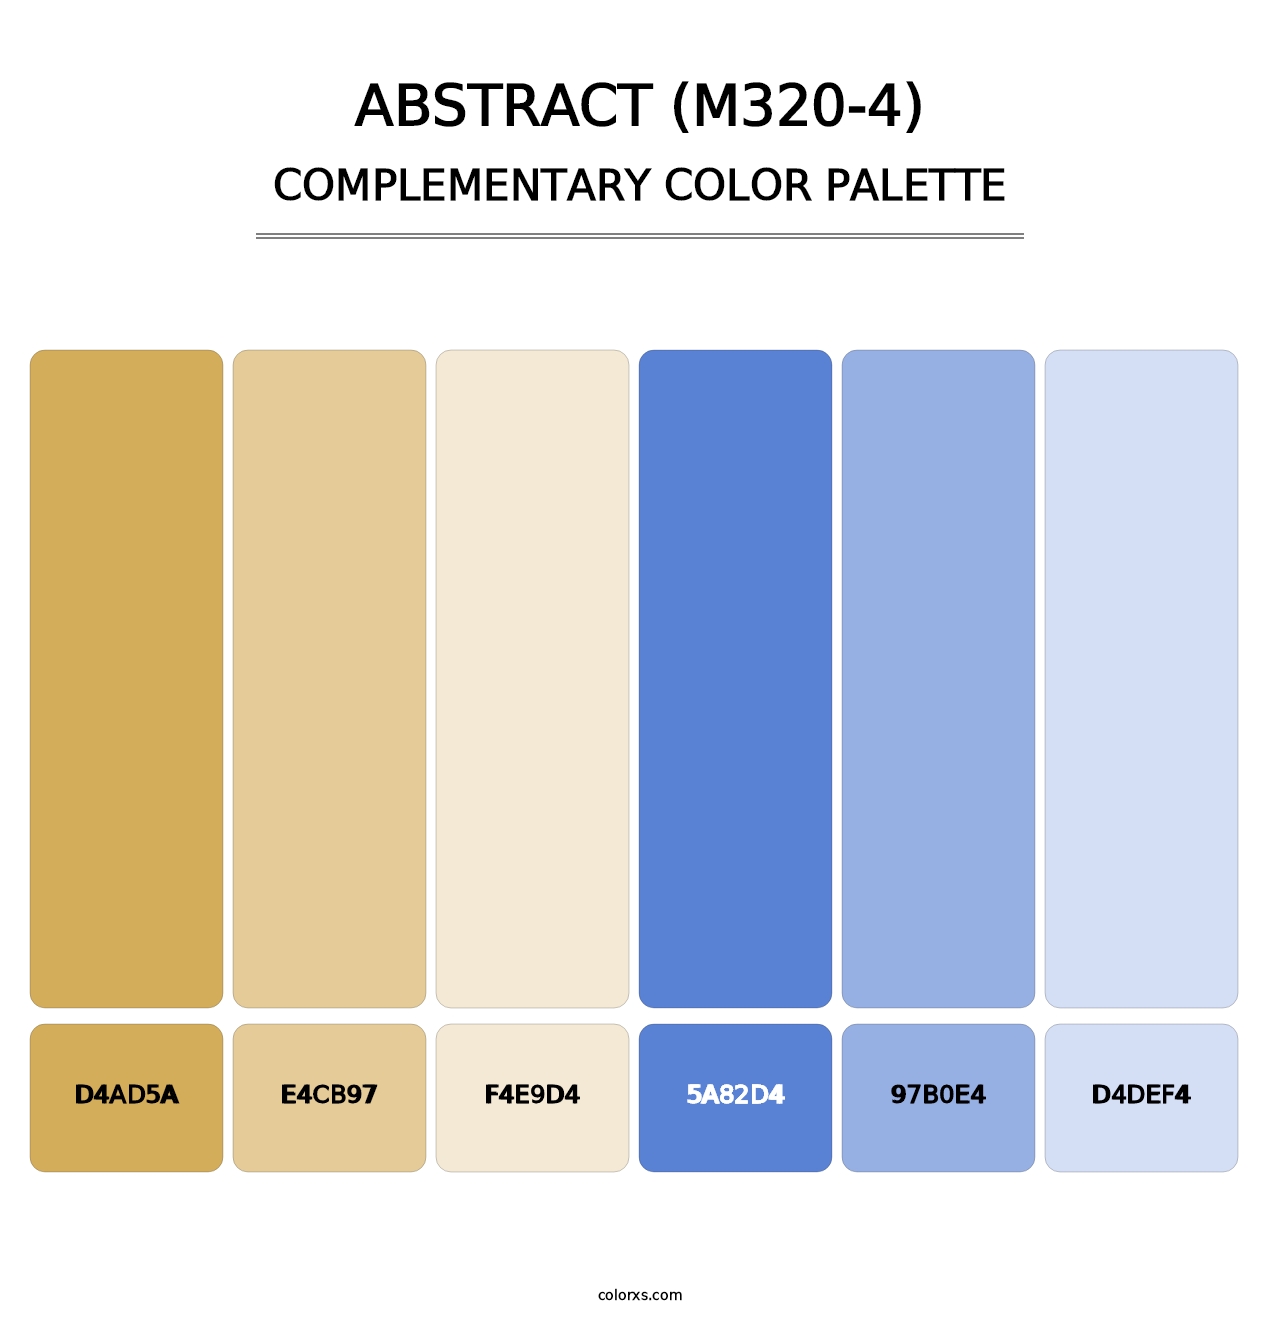 Abstract (M320-4) - Complementary Color Palette